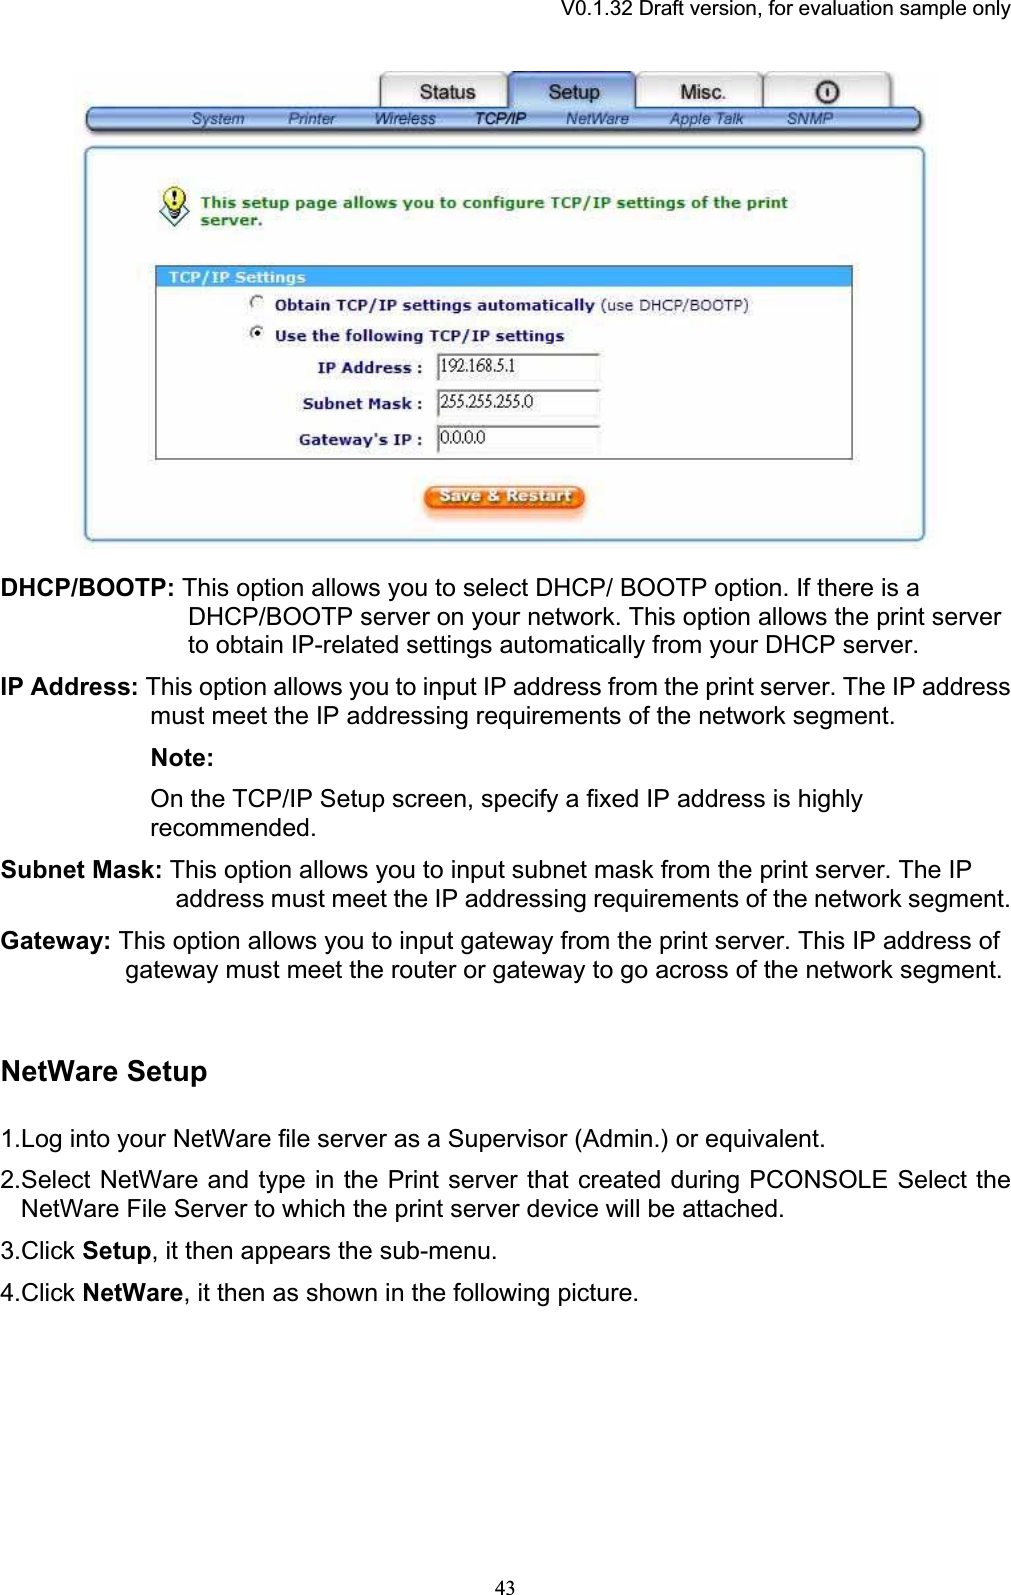 V0.1.32 Draft version, for evaluation sample onlyDHCP/BOOTP: This option allows you to select DHCP/ BOOTP option. If there is a DHCP/BOOTP server on your network. This option allows the print server to obtain IP-related settings automatically from your DHCP server. IP Address: This option allows you to input IP address from the print server. The IP address must meet the IP addressing requirements of the network segment.  Note: On the TCP/IP Setup screen, specify a fixed IP address is highly recommended.Subnet Mask: This option allows you to input subnet mask from the print server. The IP address must meet the IP addressing requirements of the network segment. Gateway: This option allows you to input gateway from the print server. This IP address of gateway must meet the router or gateway to go across of the network segment. NetWare Setup 1.Log into your NetWare file server as a Supervisor (Admin.) or equivalent. 2.Select NetWare and type in the Print server that created during PCONSOLE Select the NetWare File Server to which the print server device will be attached. 3.Click Setup, it then appears the sub-menu.4.Click NetWare, it then as shown in the following picture. 43